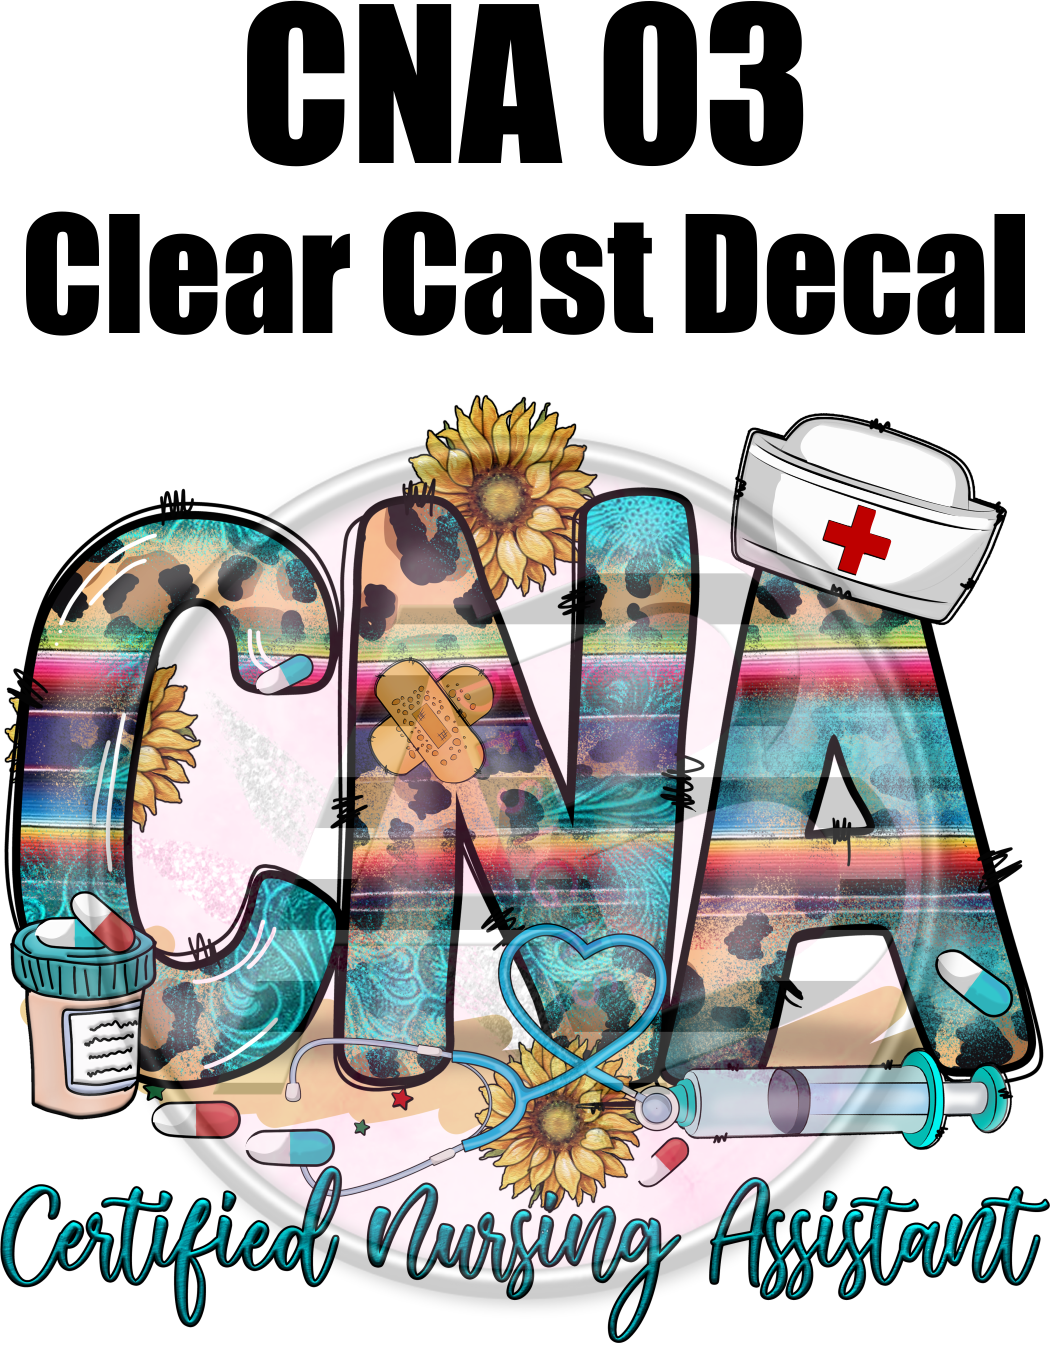 CNA 03 - Clear Cast Decal - 131